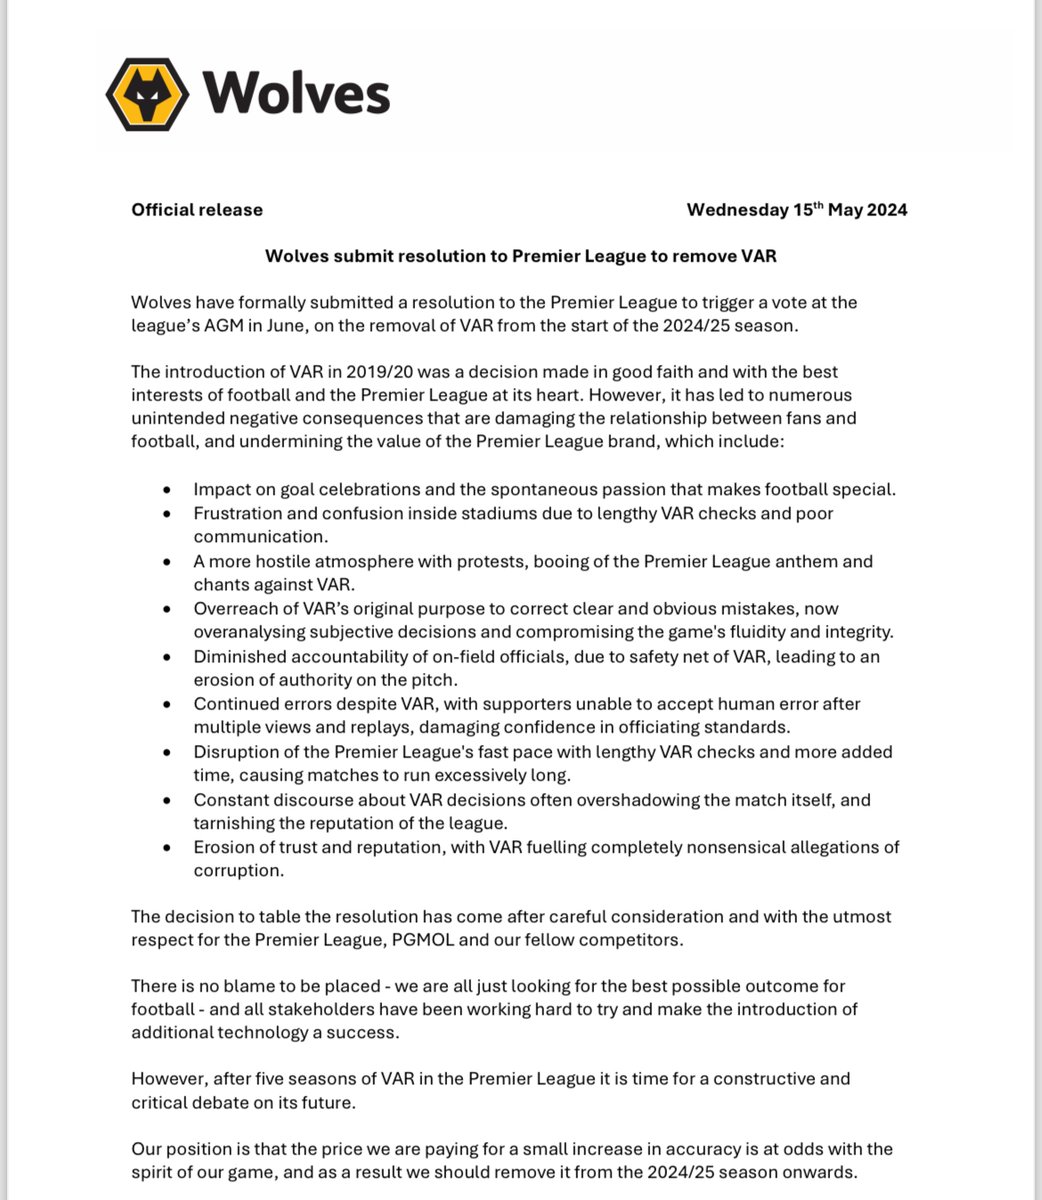 🚨 Wolves have submitted a resolution to the Premier League calling for the abandonment of VAR from next season. Big exclusive from @David_Ornstein. A vote will take on June 6 and needs a two-thirds majority to pass. Wolves statement says 'the price we are paying for a small